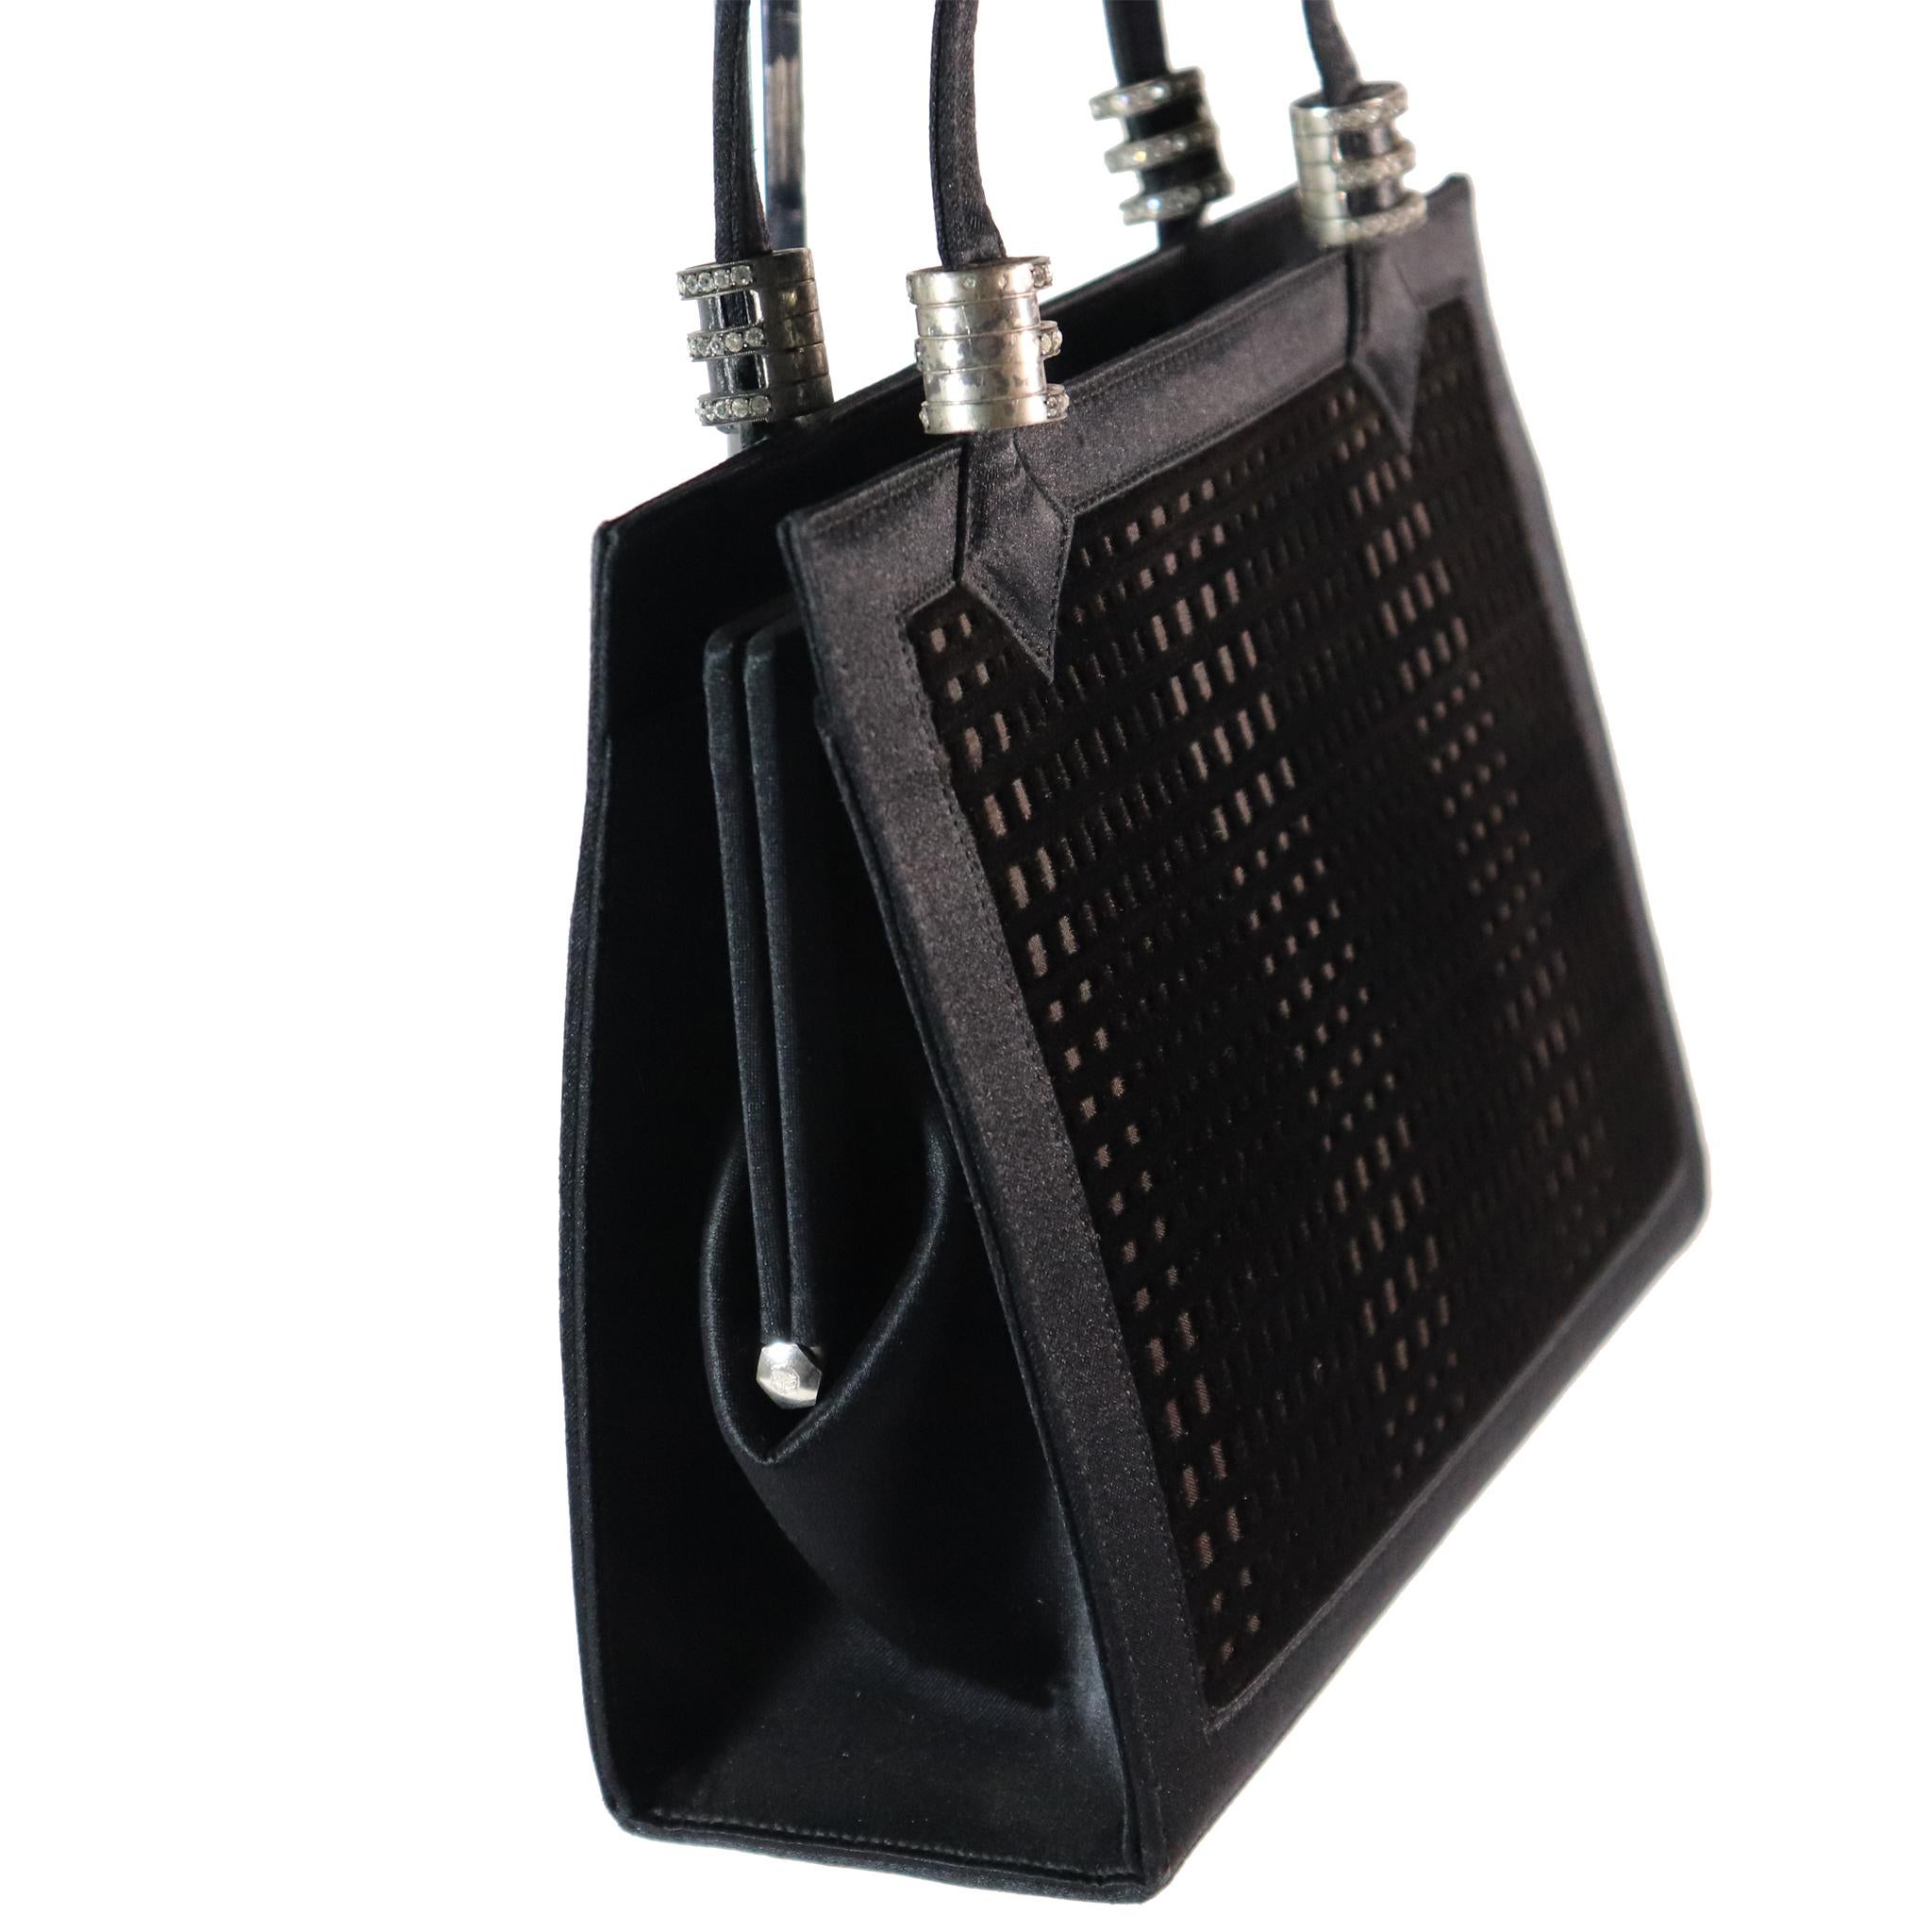 Martin Van Schaak Black Velvet Grid Pattern W/ Rhinestone Hardware from 1960s. In excellent condition, very rare bag 

Measurements: 

Height - 6.5 Inches 
Width - 8.6 Inches 
Height with Strap - 11.3 Inches 